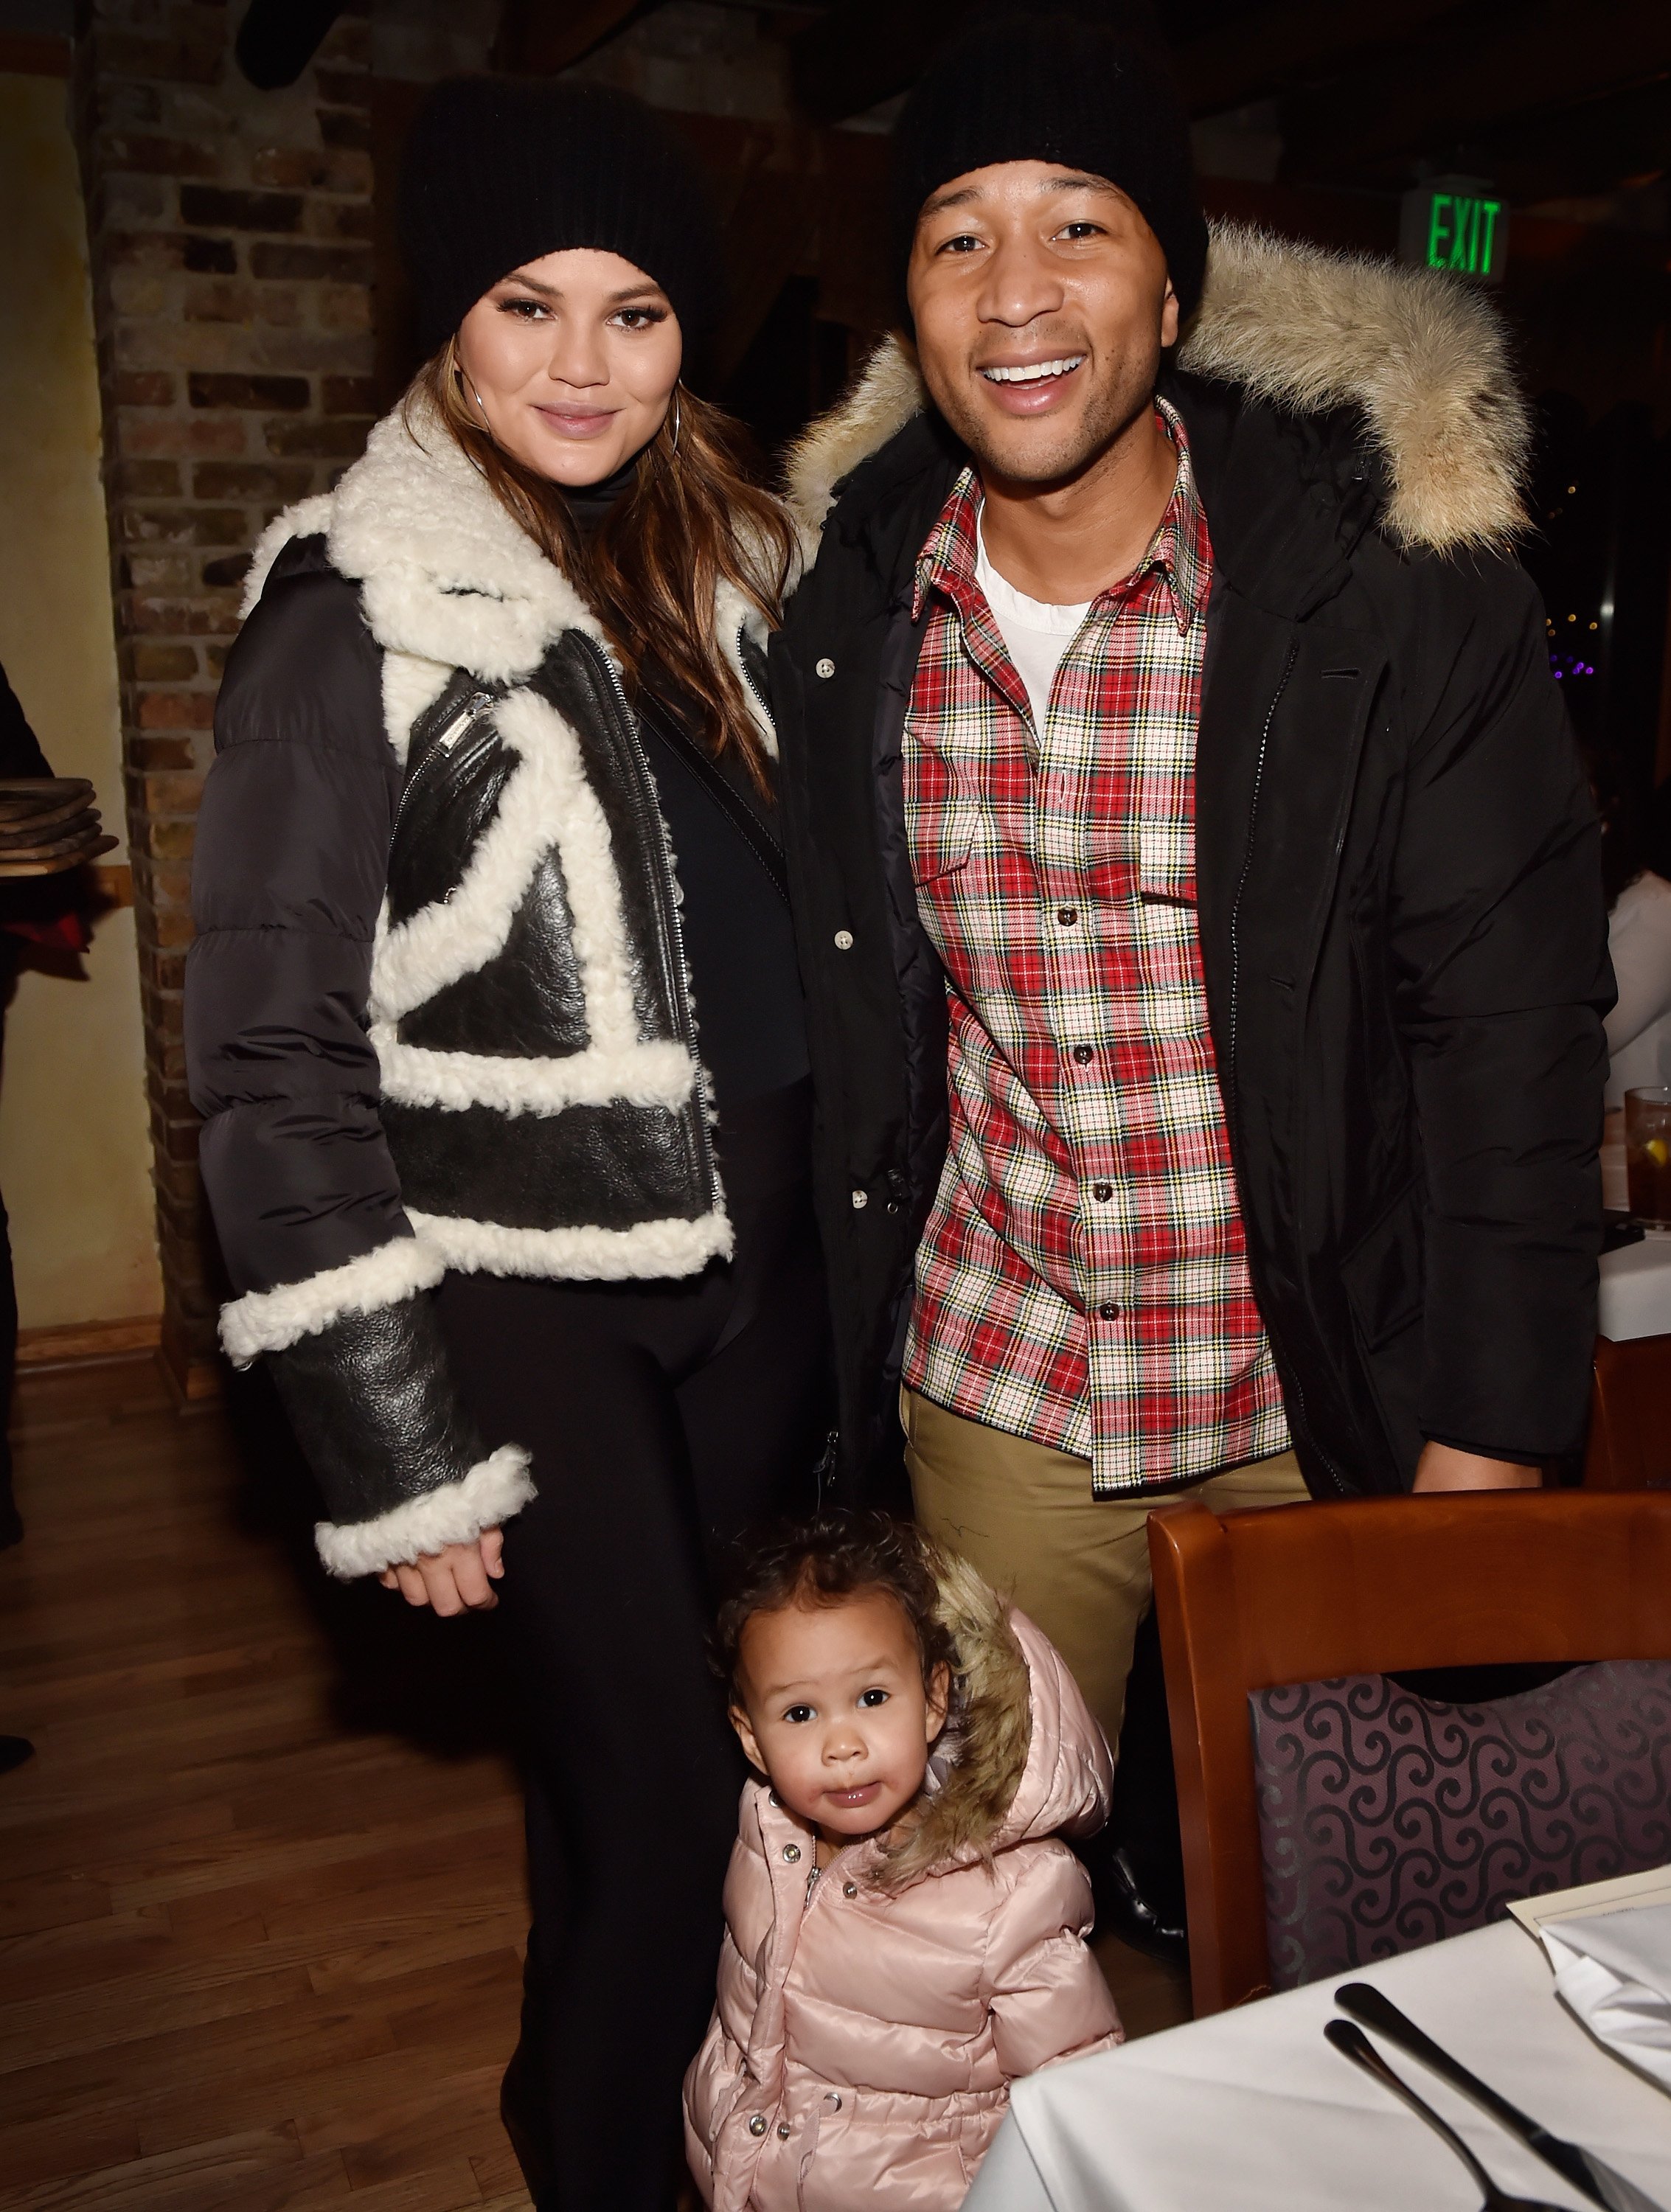 Chrissy Teigen (L) and her husband, recording artist John Legend pose with their daughter Luna Simone Stephens at the "Monster" dinner film reception presented by the RAND Luxury Escape at Grappa during the 2018 Sundance Film Festival on January 21, 2018 in Park City, Utah | Source: Getty Images